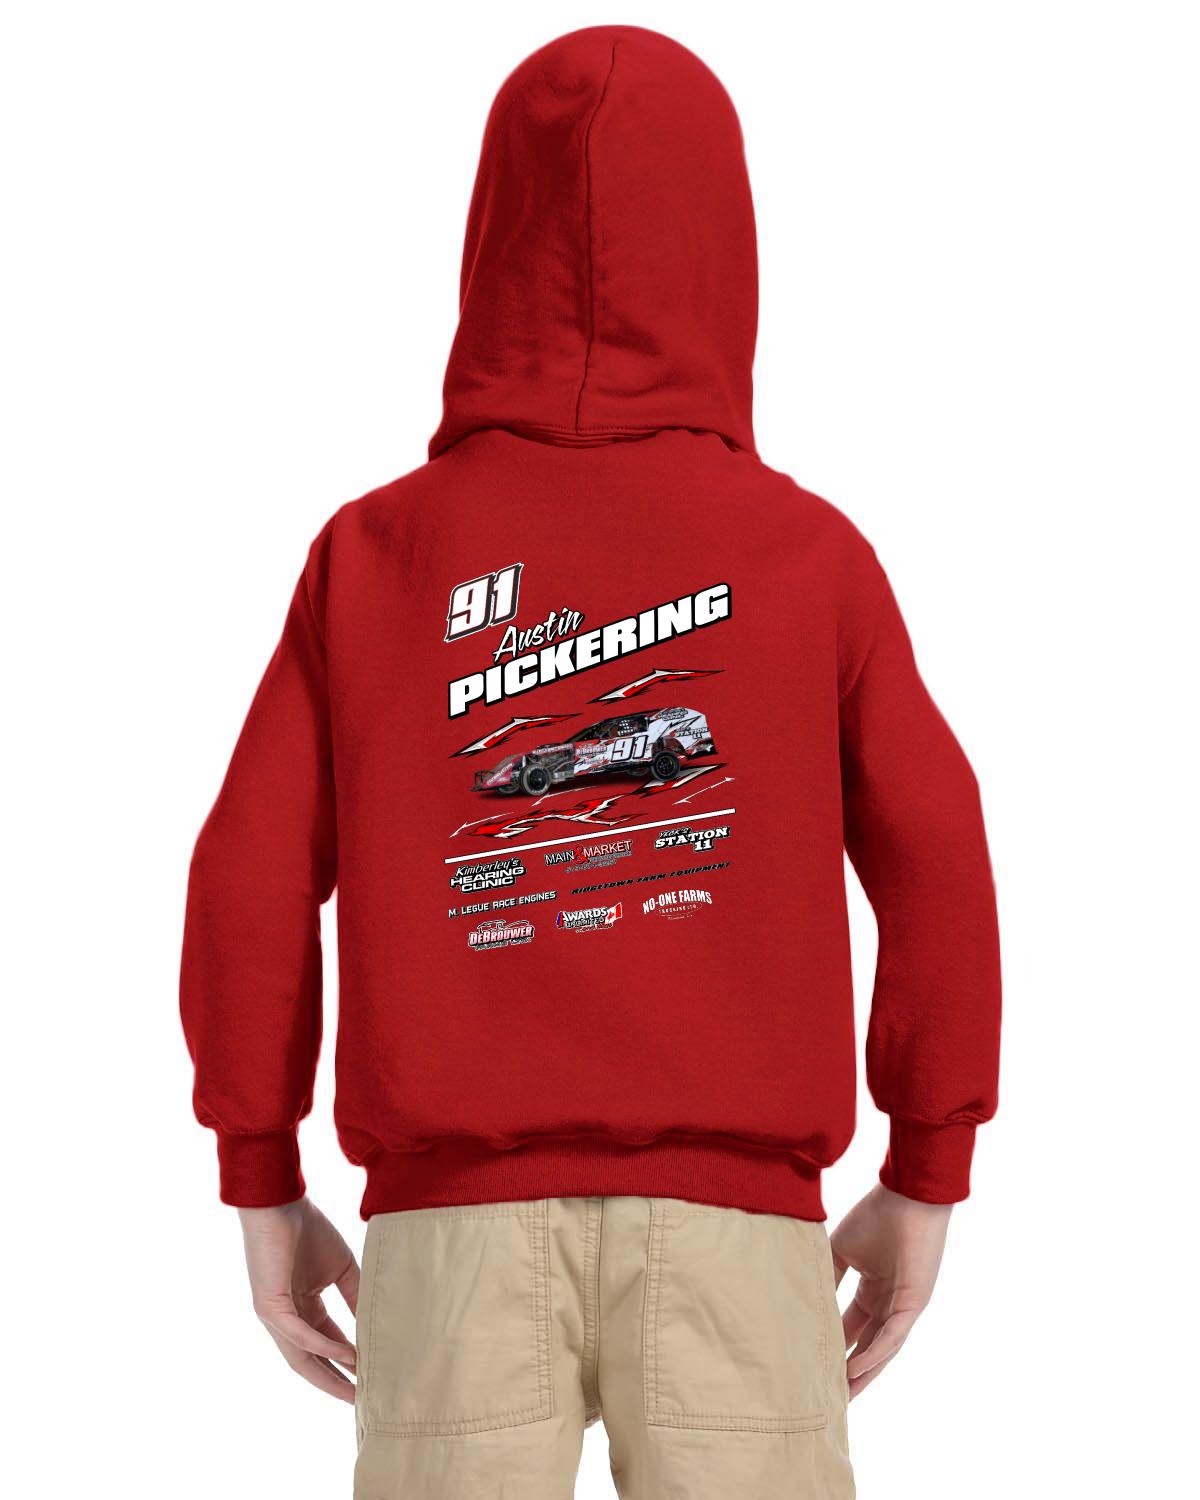 Austin Pickering Double sided Youth Hoodie